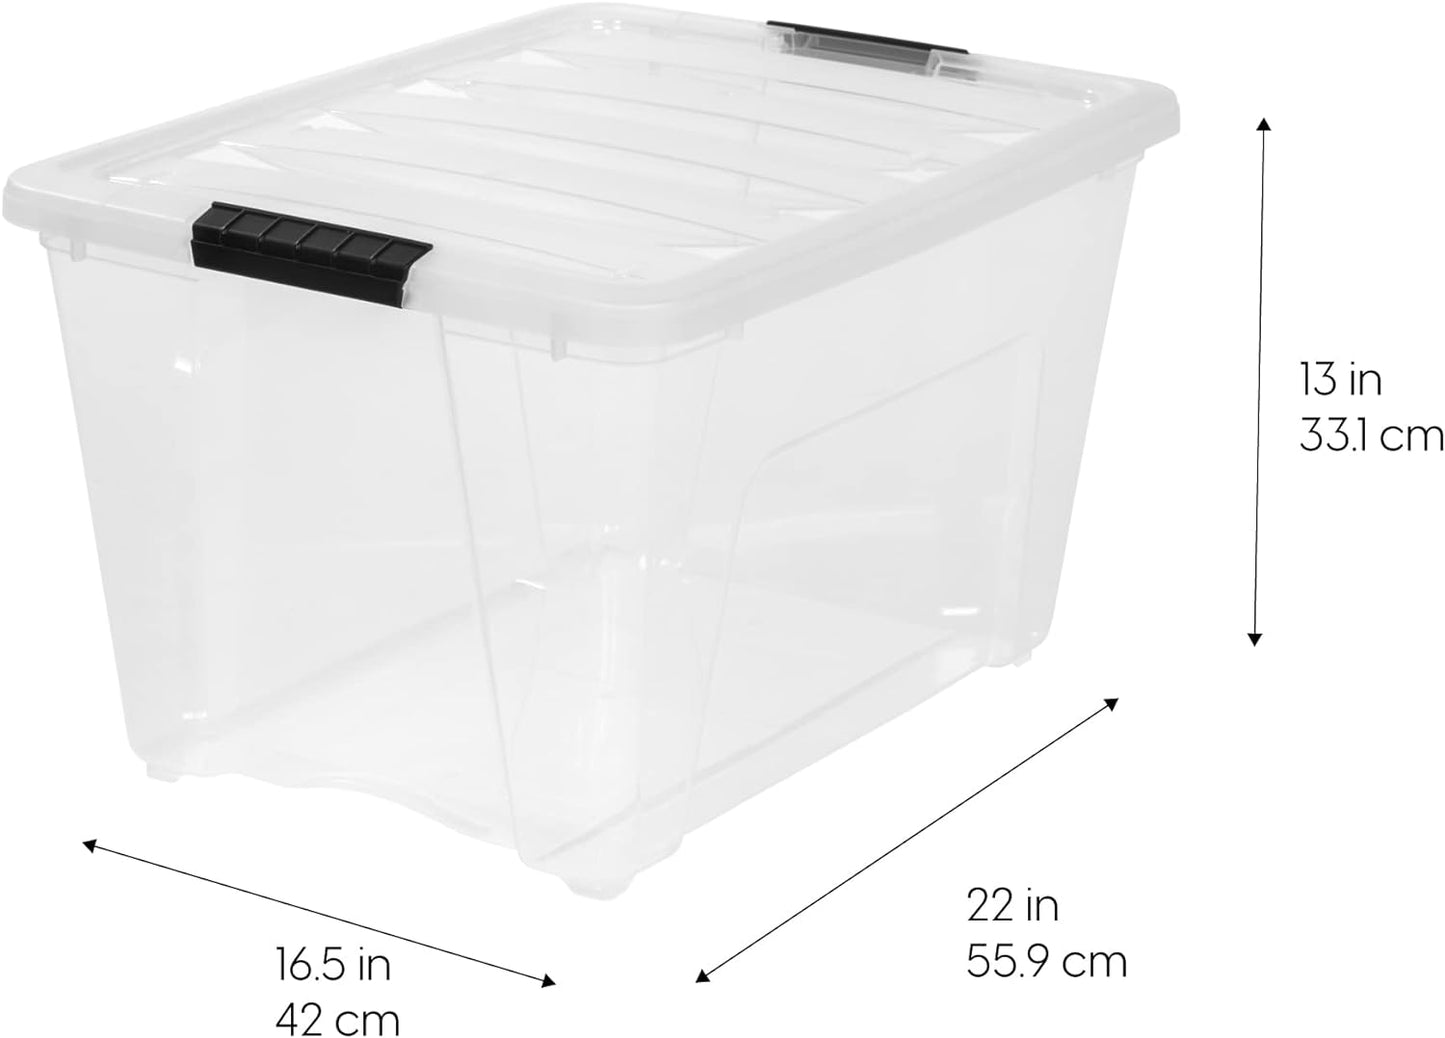 Uniites™ IRIS USA 53 Quart Stackable Plastic Storage Bins with Lids and Latching Buckles, 6 Pack - Clear, Containers with Lids and Latches, Durable Nestable Closet $79.91